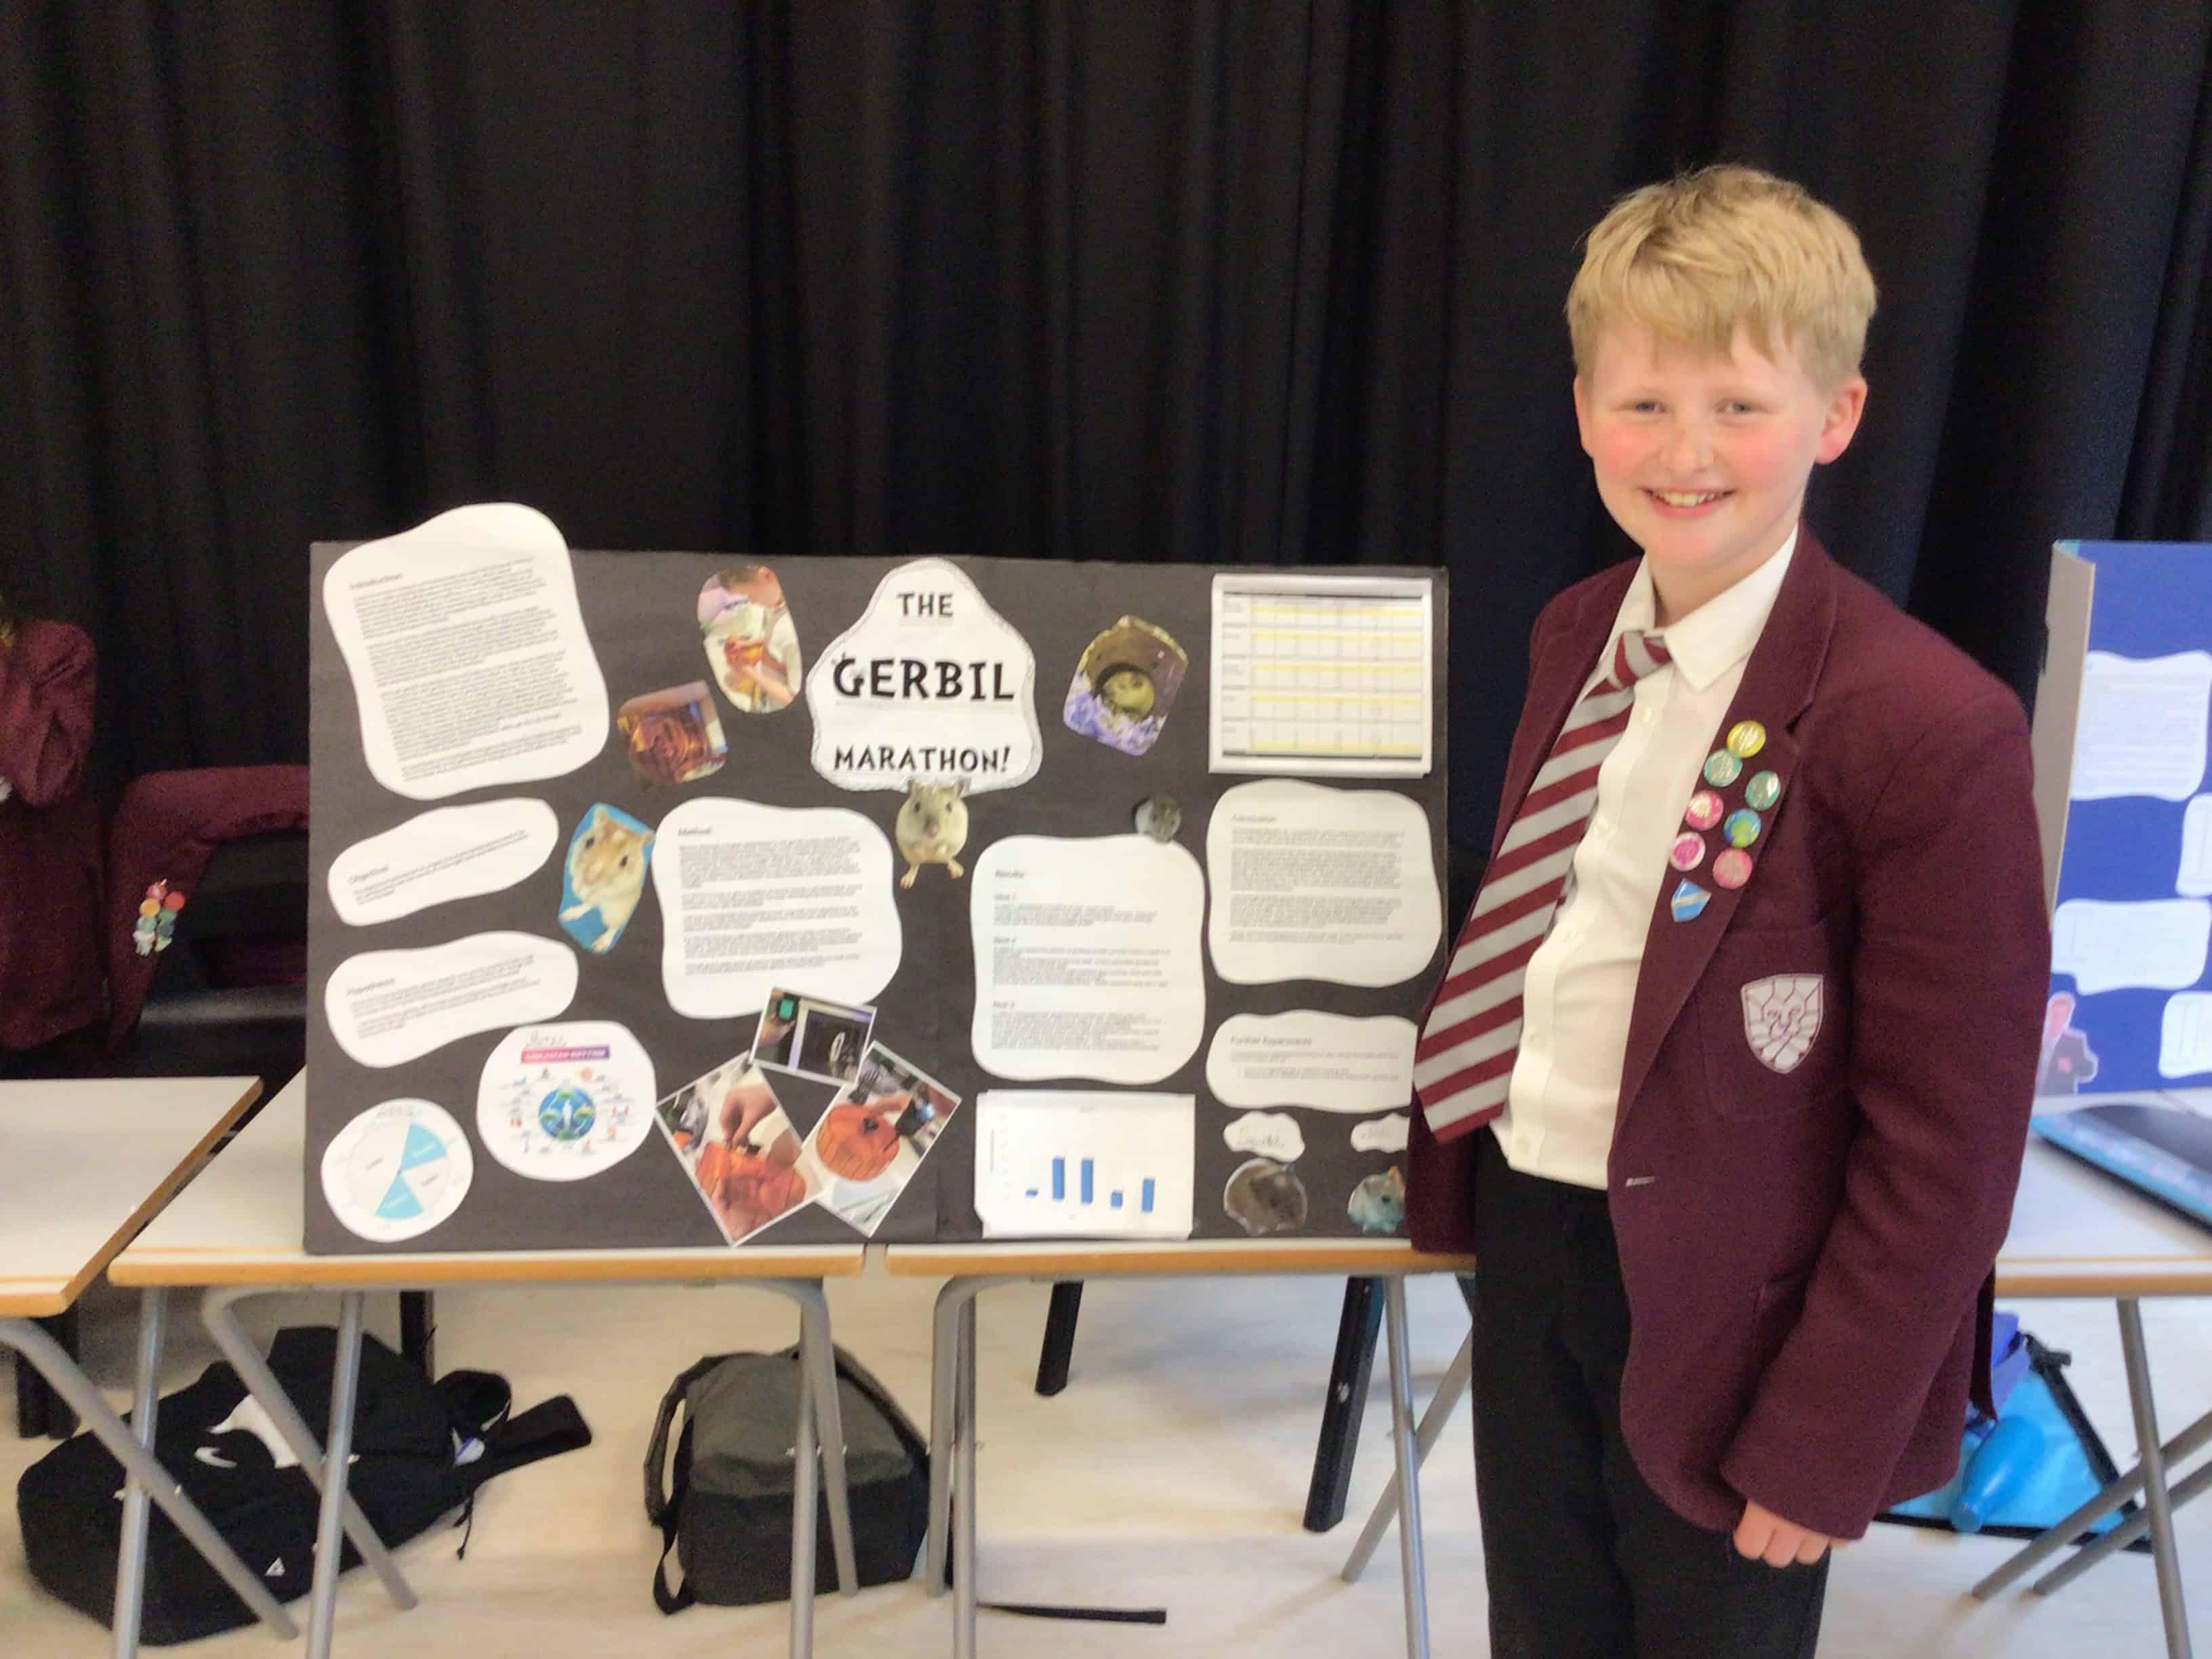 Will, a Hazel Grove High School student poses with his Science project, Gerbil Marathon.